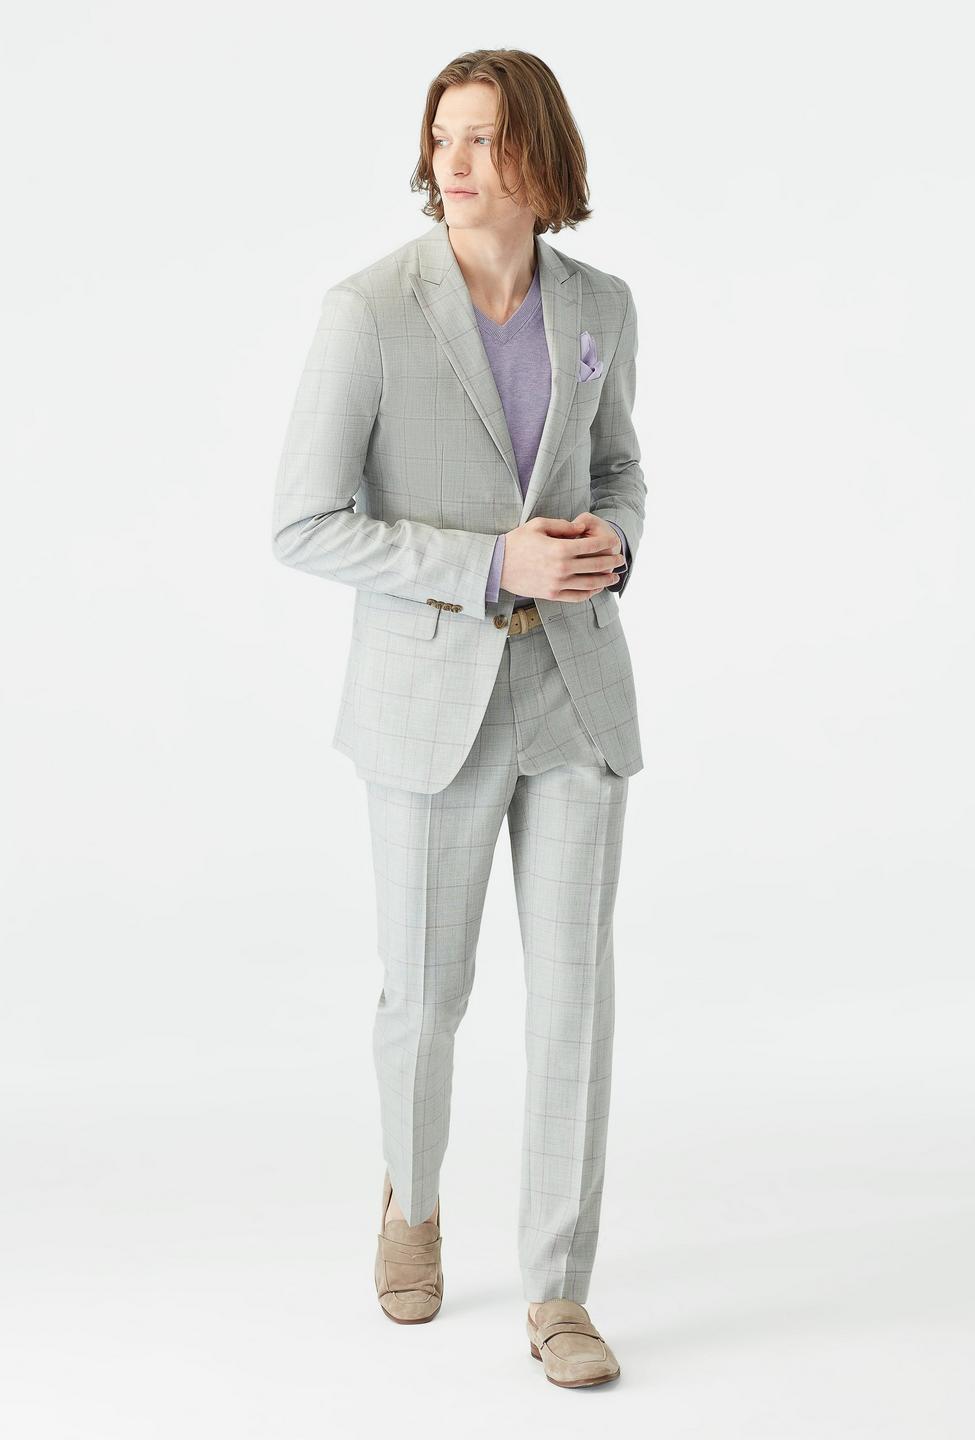 Keyford Windowpane Light Gray With Lavender Suit